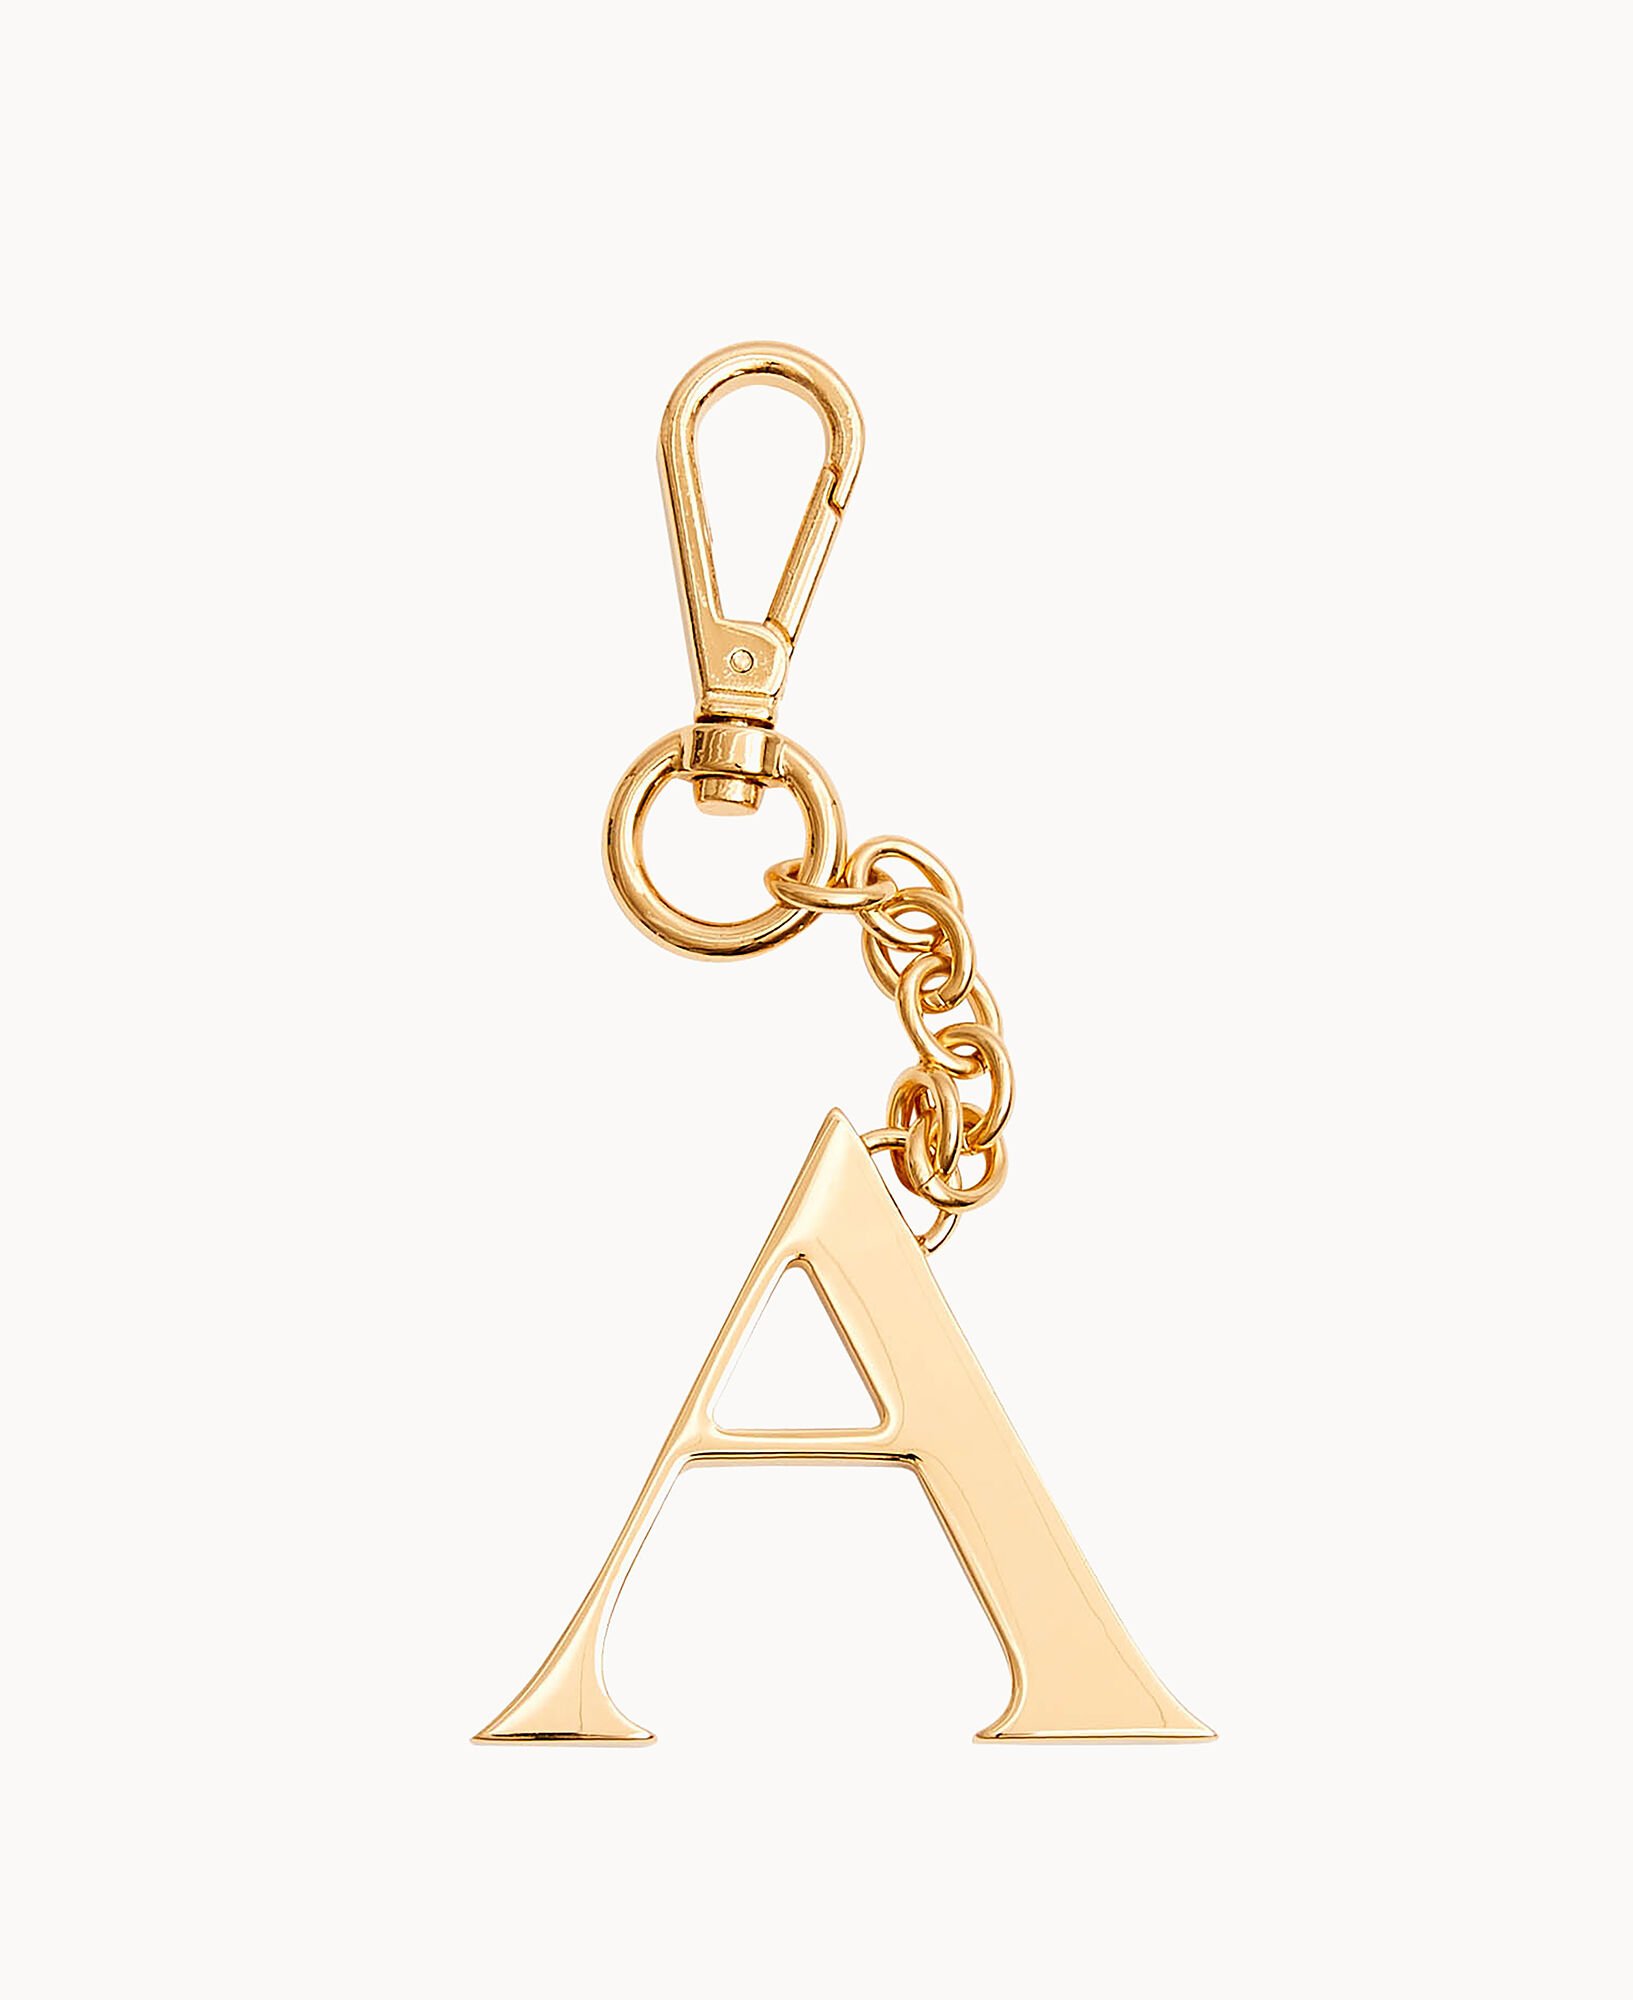 Leather Initial Bag Charm Initial Key Ring Leather Key Ring 